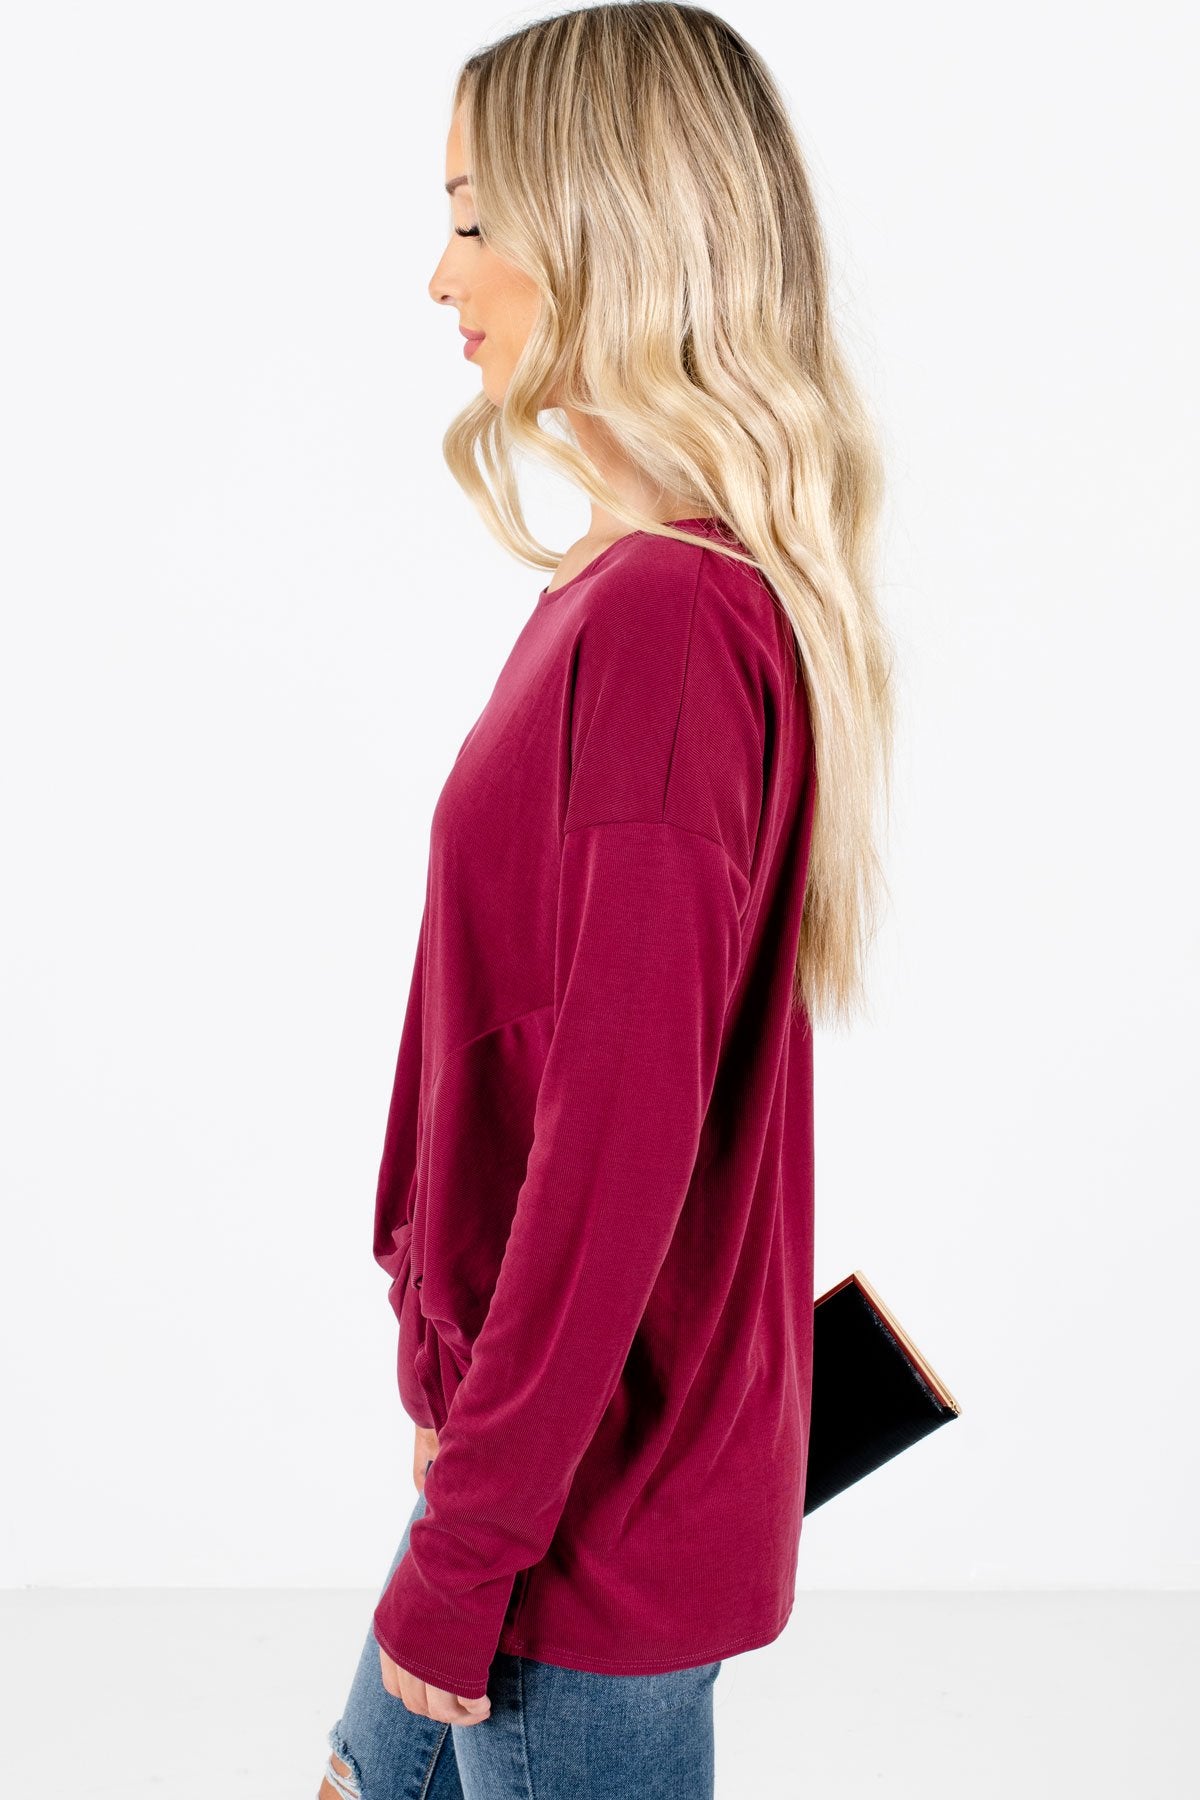 Red Long Sleeve Boutique Tops for Women